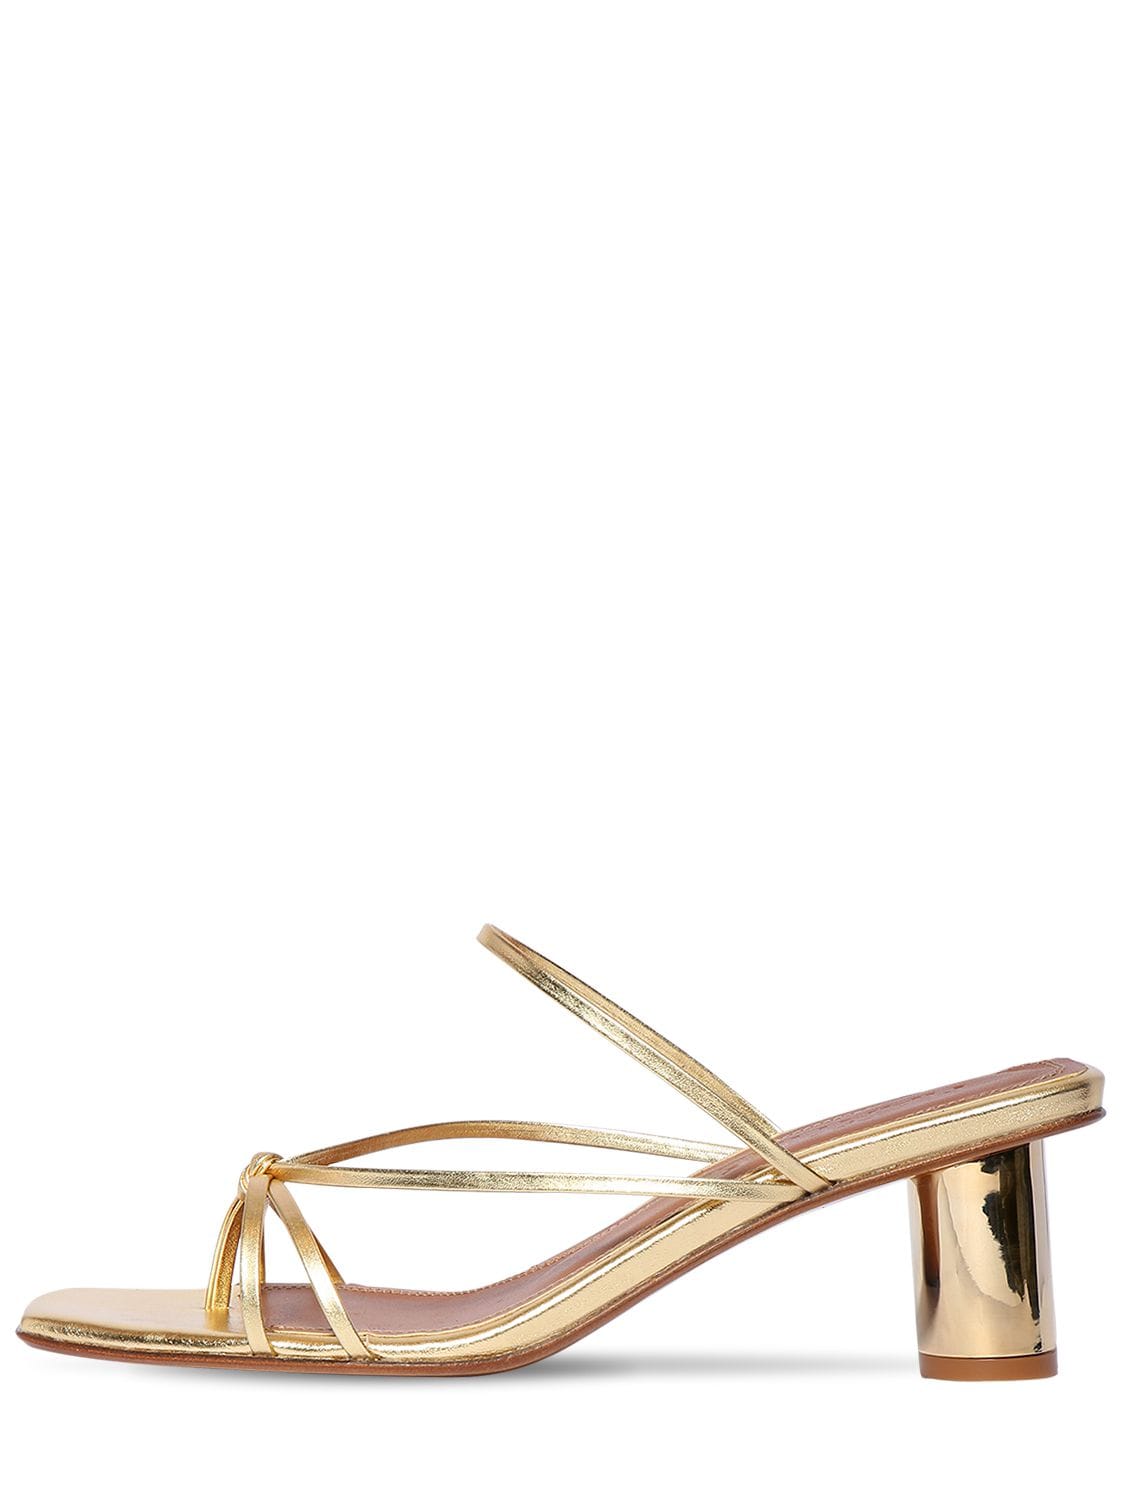 Souliers Martinez 55mm Metallic Leather Thong Sandals In Gold | ModeSens